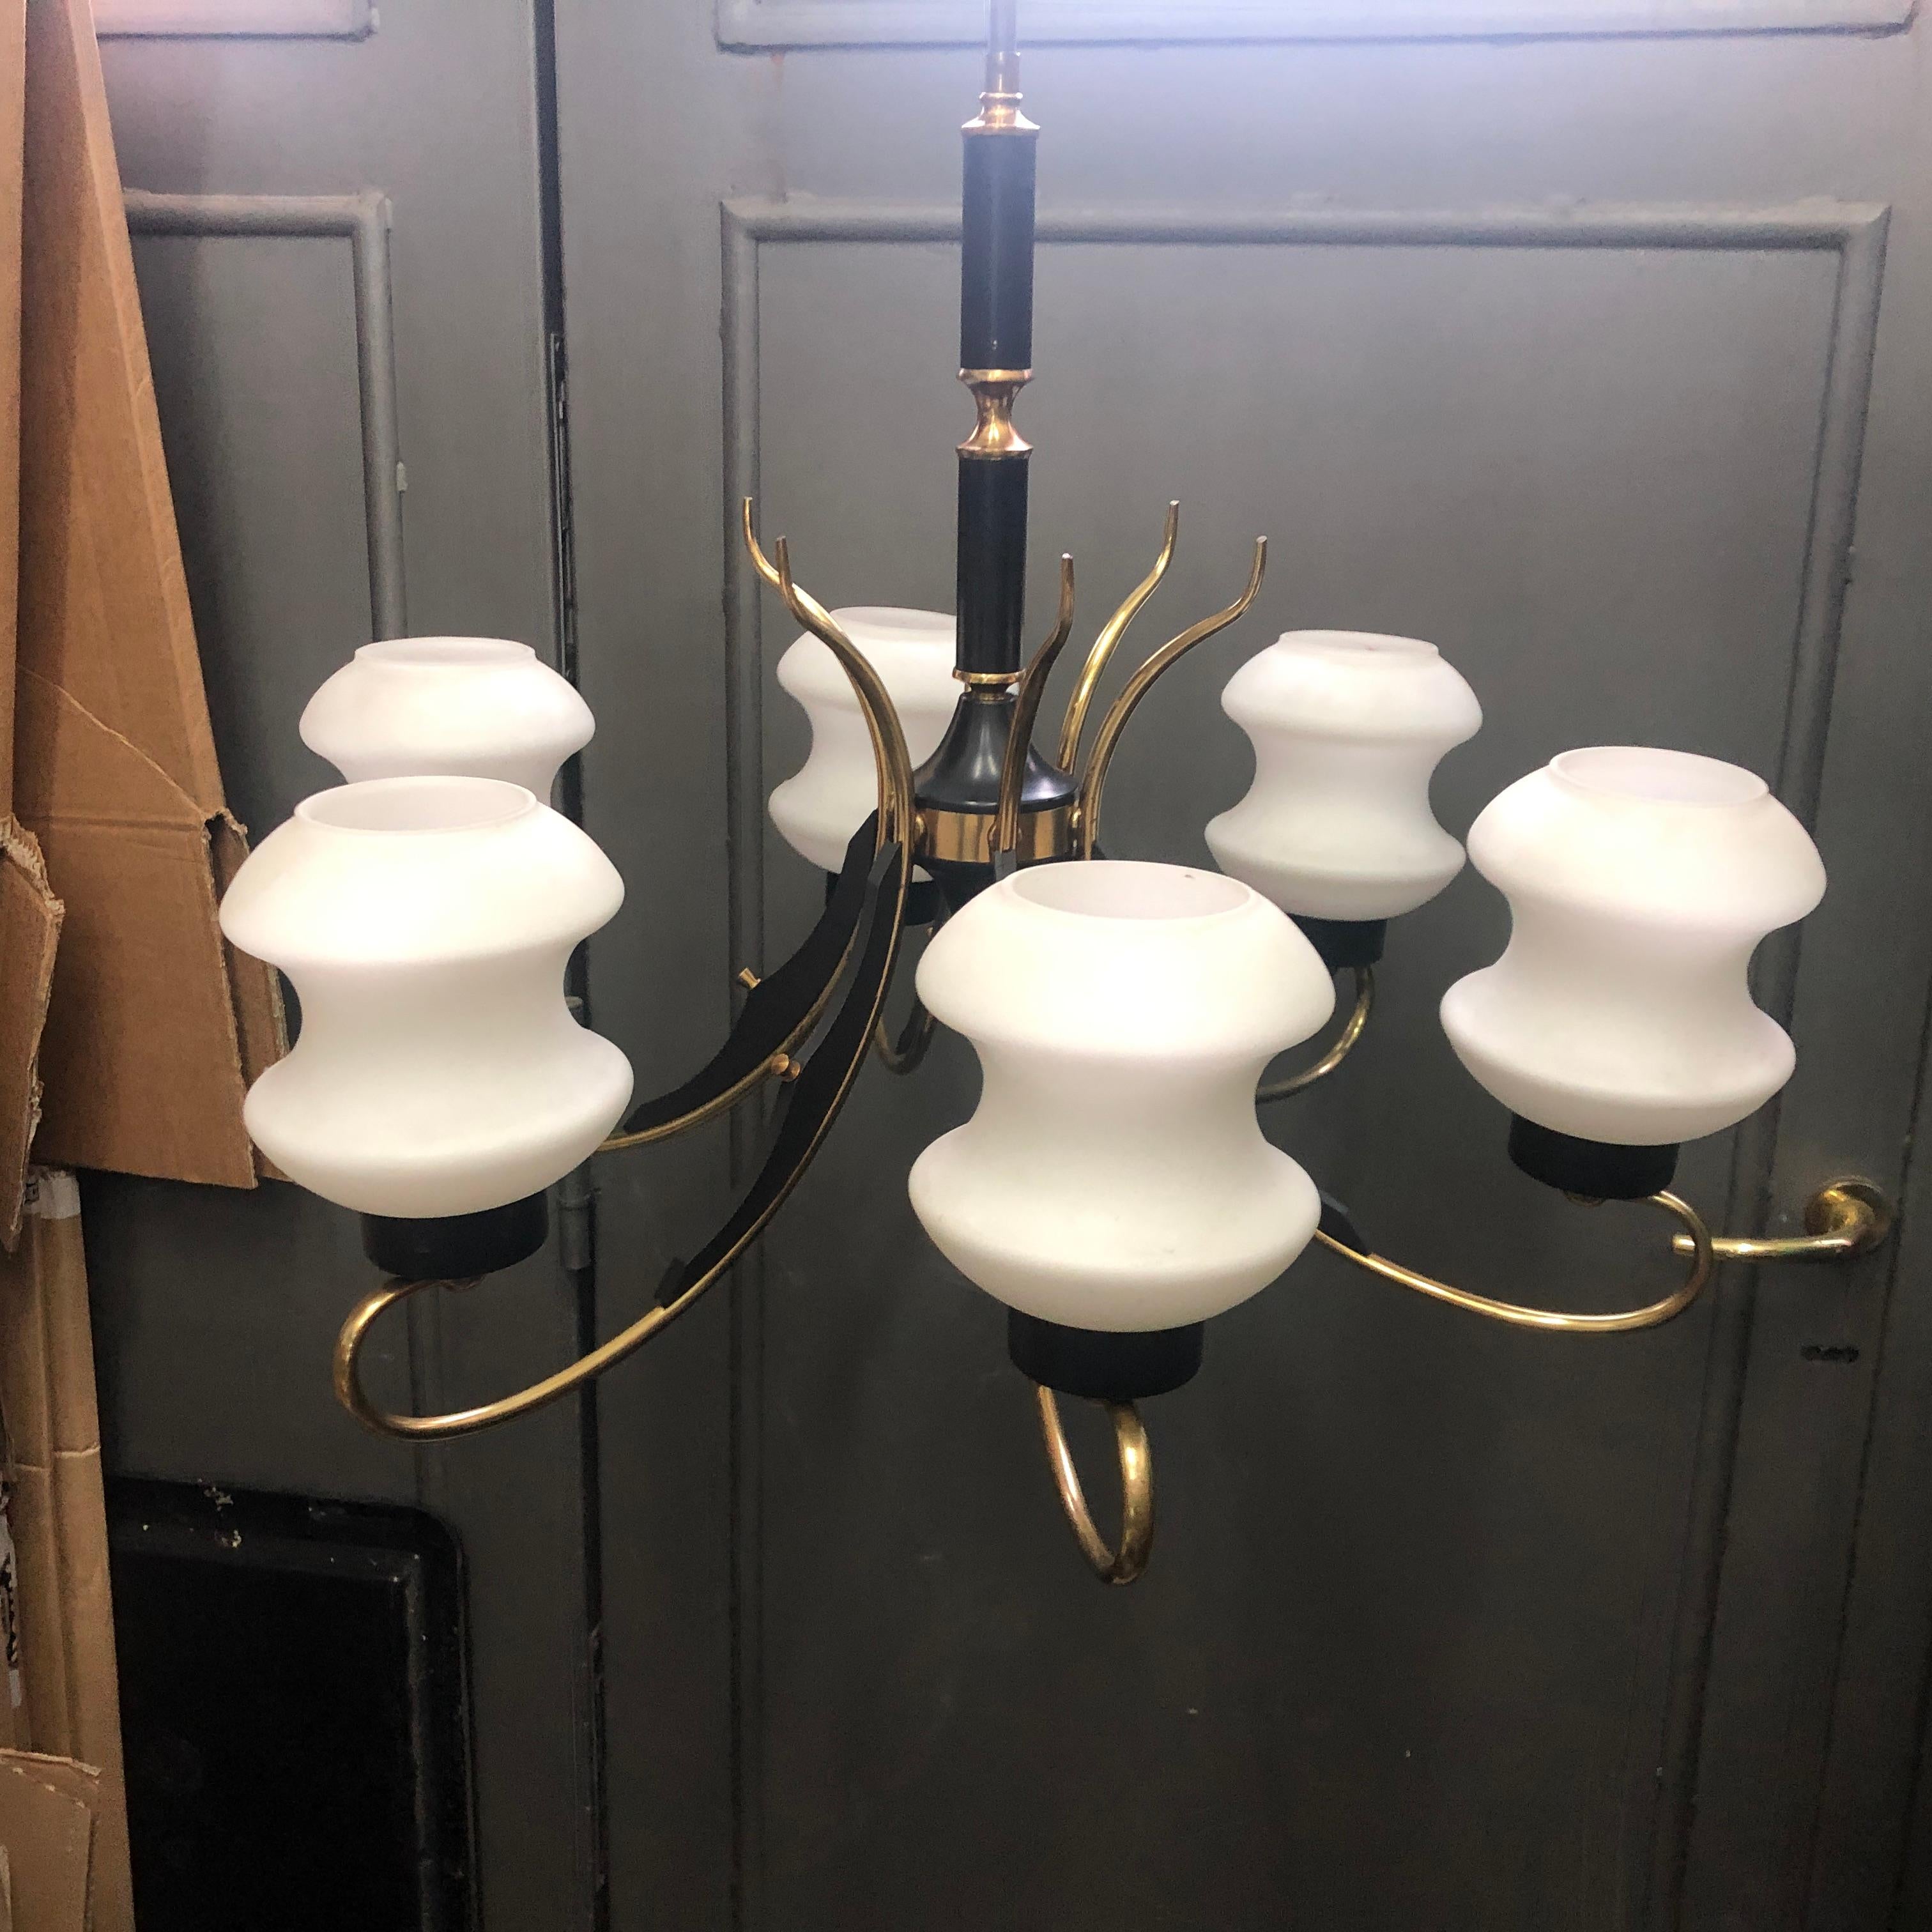 A Mid-Century Modern chandelier in the style of Stilnovo, six lights, in perfect working order. It works with both 110 and 220 Volt and needs regular e14 bulbs. Opaline white glass diffusers are in perfect conditions, ebonized wood and brass parts